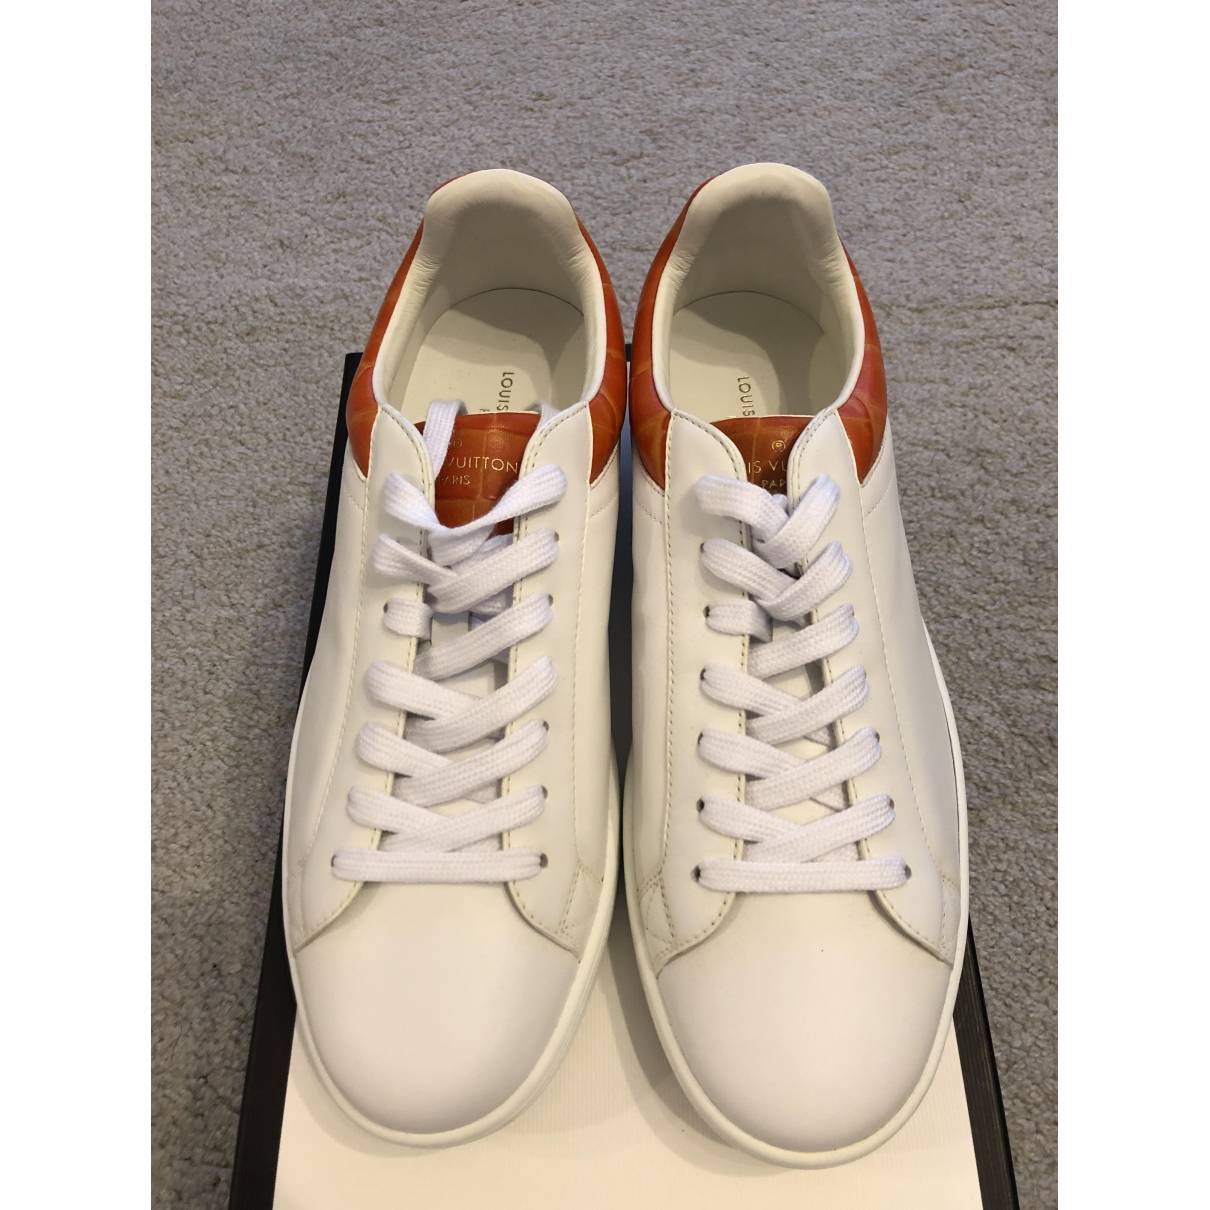 Luxembourg leather low trainers Louis Vuitton White size 41 EU in